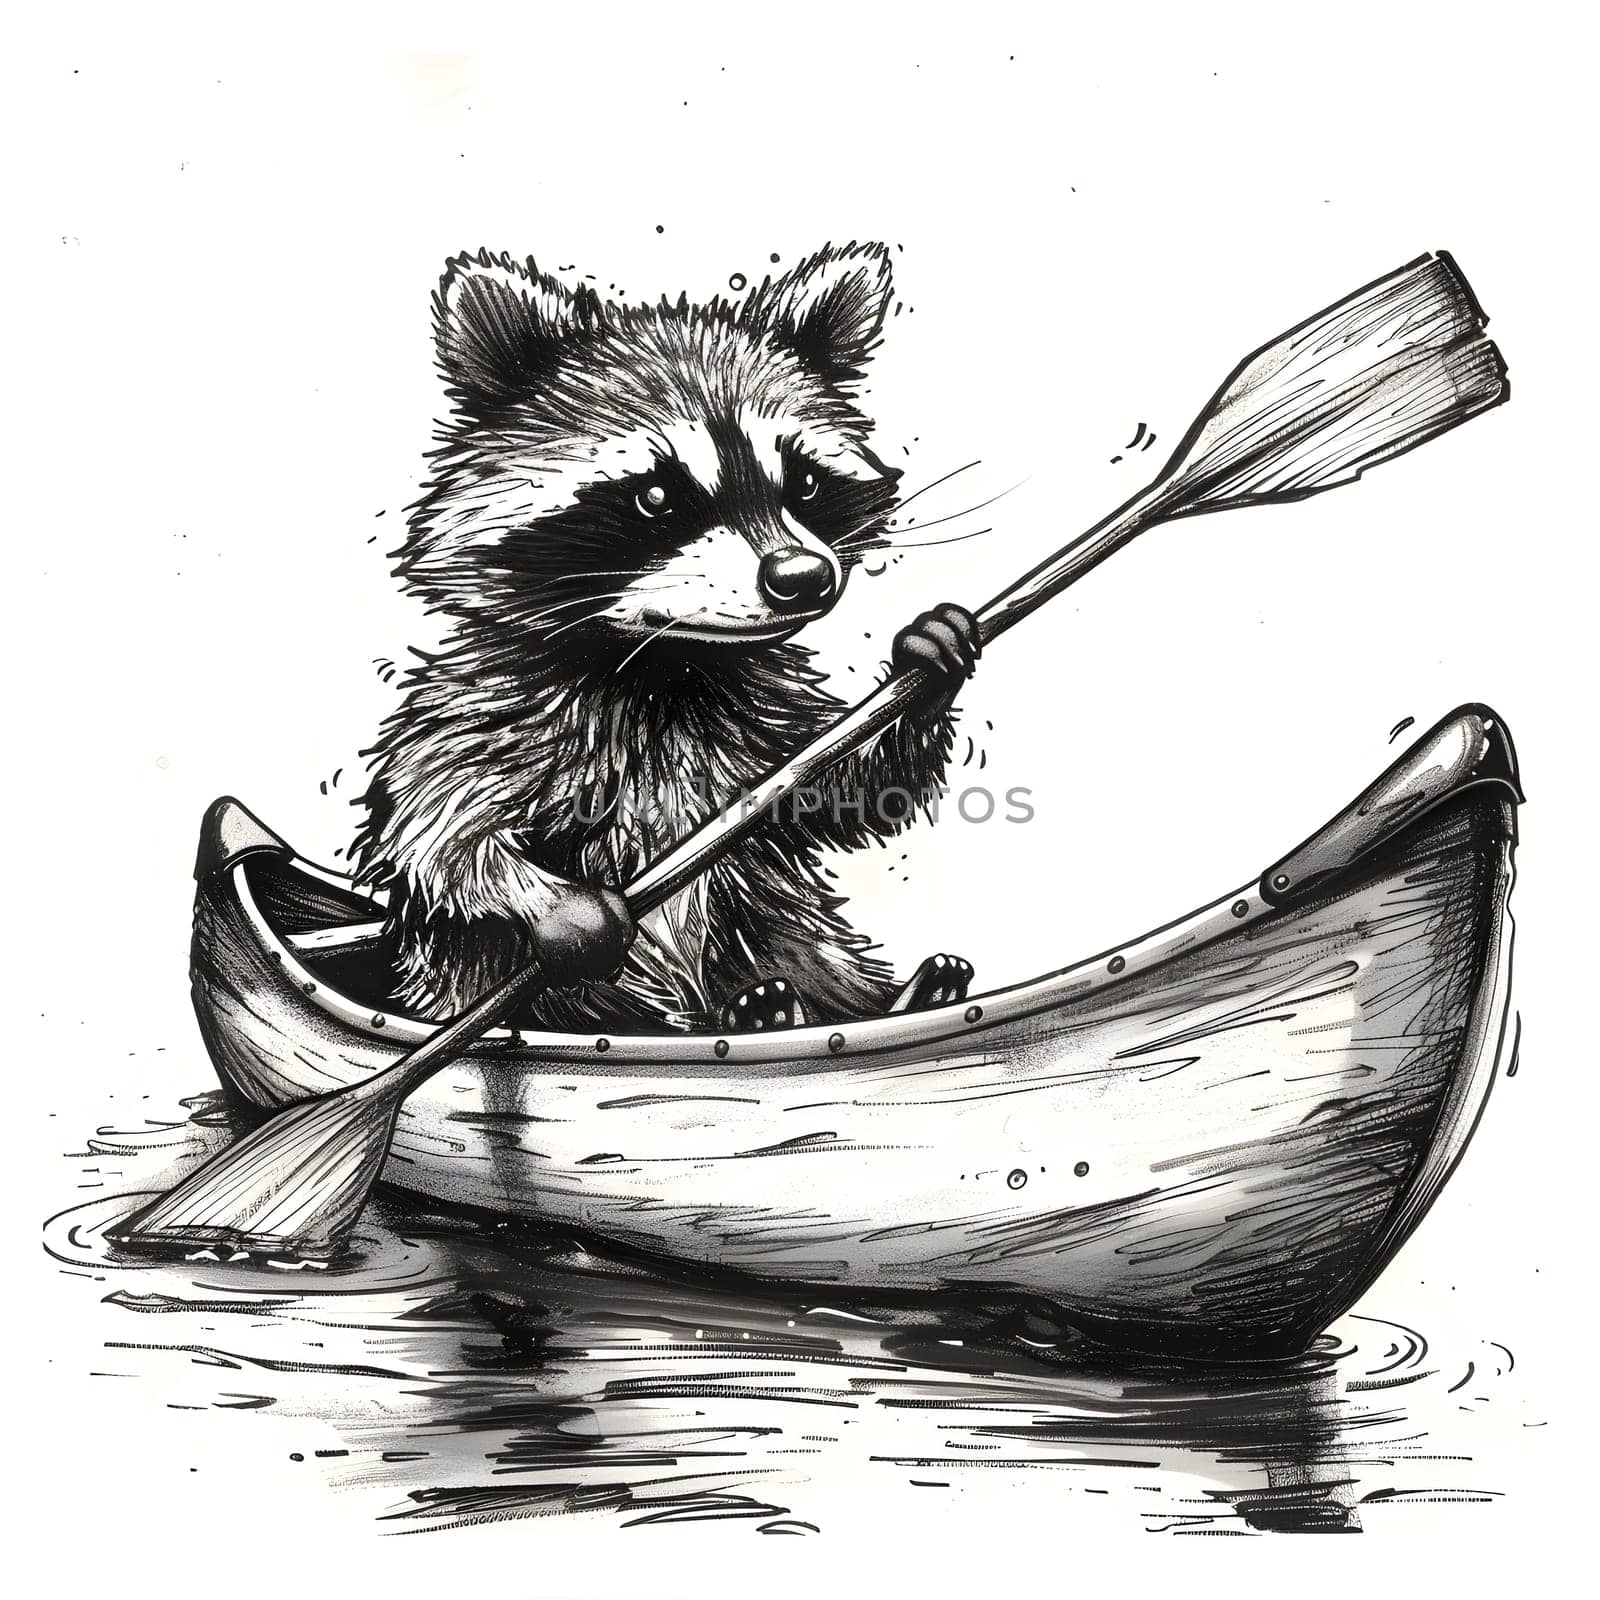 An illustration of a raccoon rowing a canoe in the monochrome water, with its whiskers gently flowing in the wind. A beautiful art piece